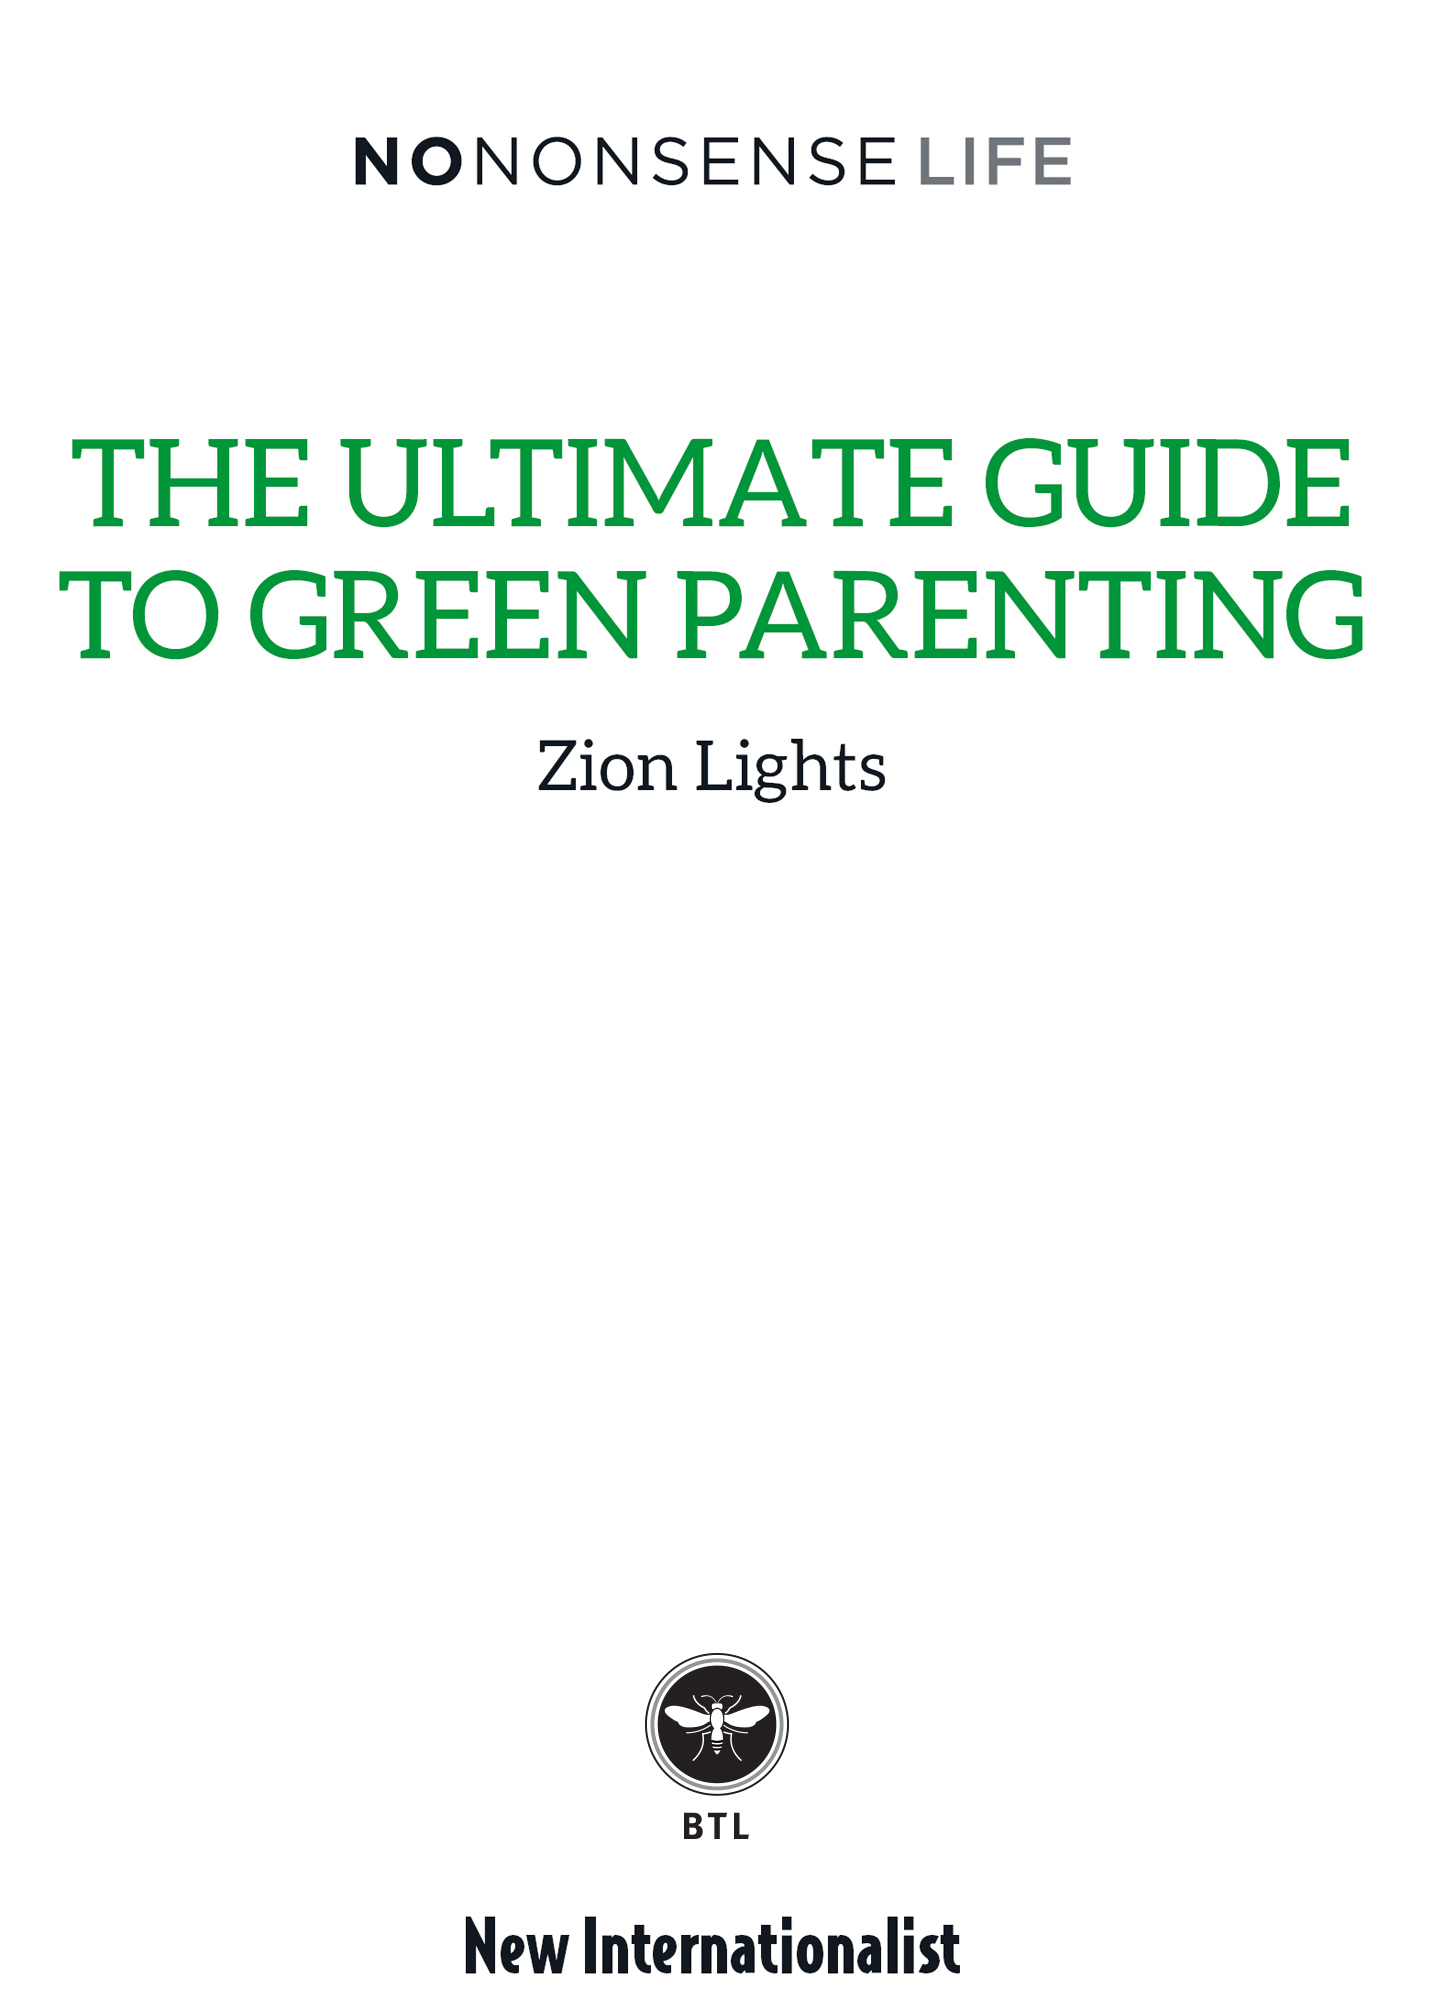 The Ultimate Guide to Green Parenting - image 3